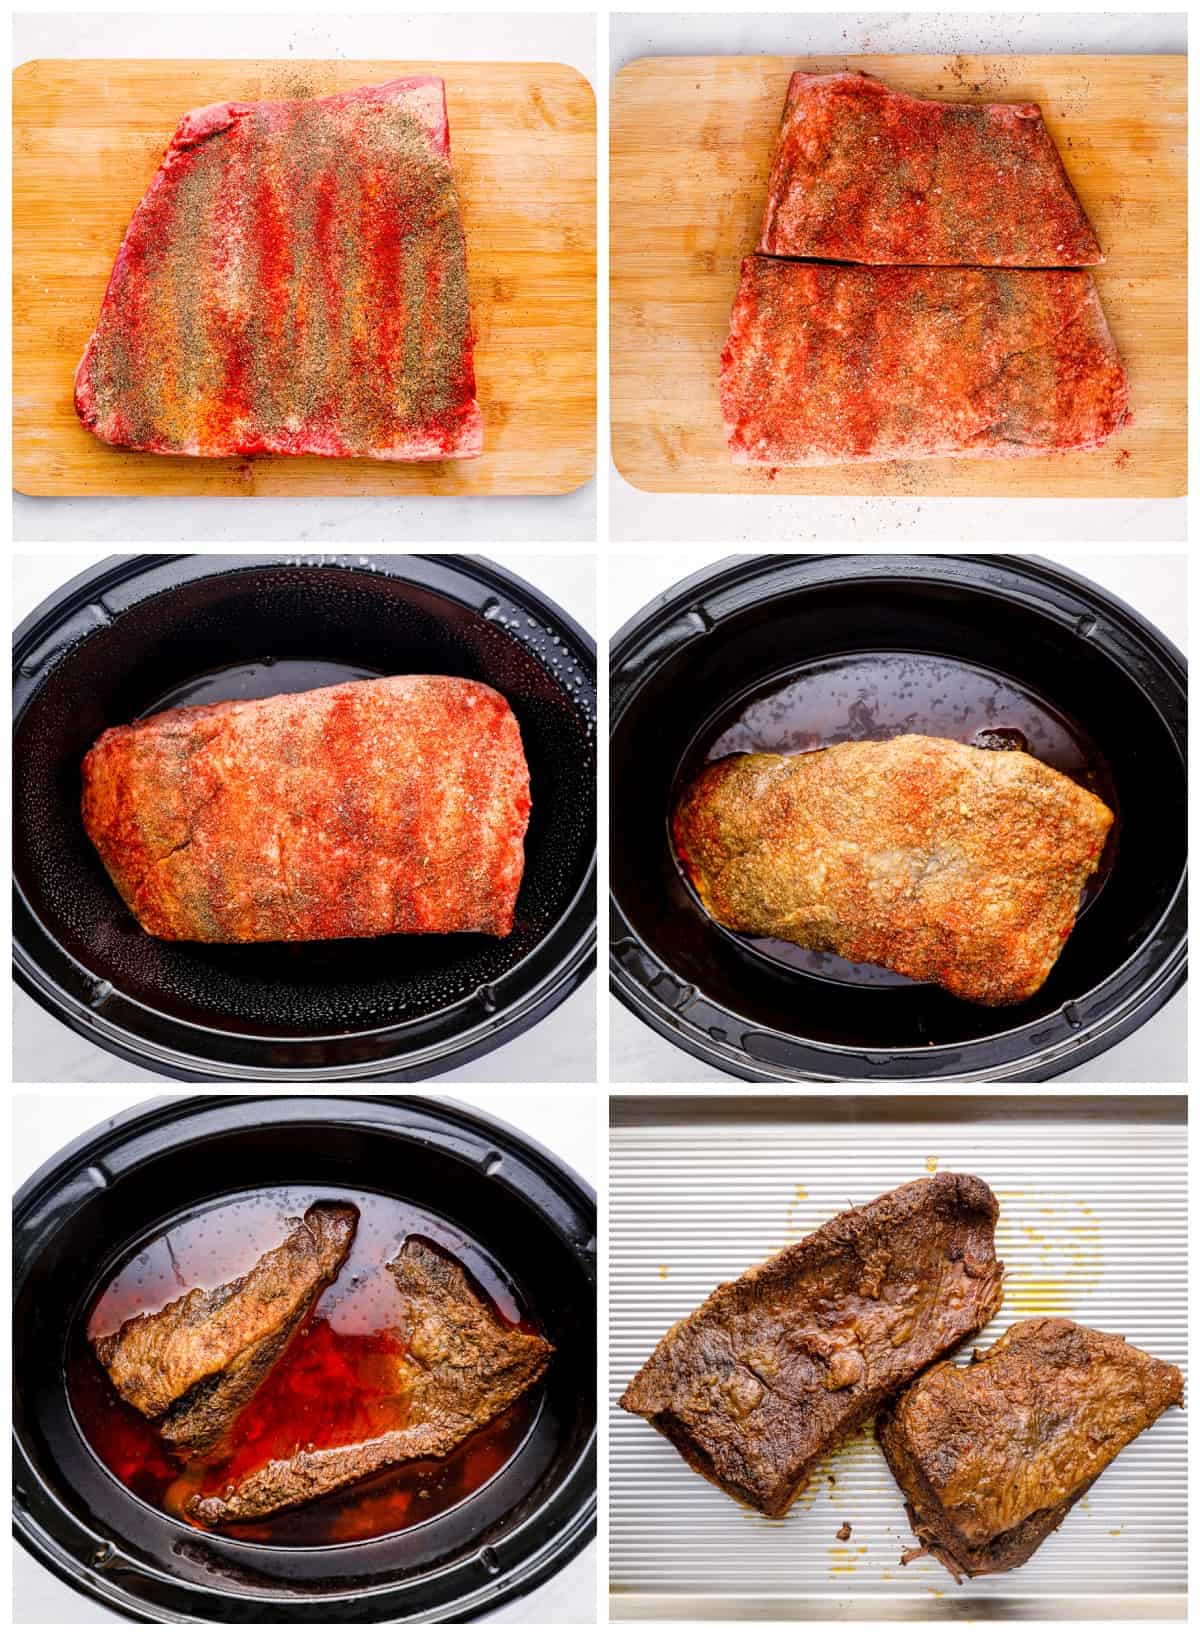 how to make crockpot brisket step by step photo instructions